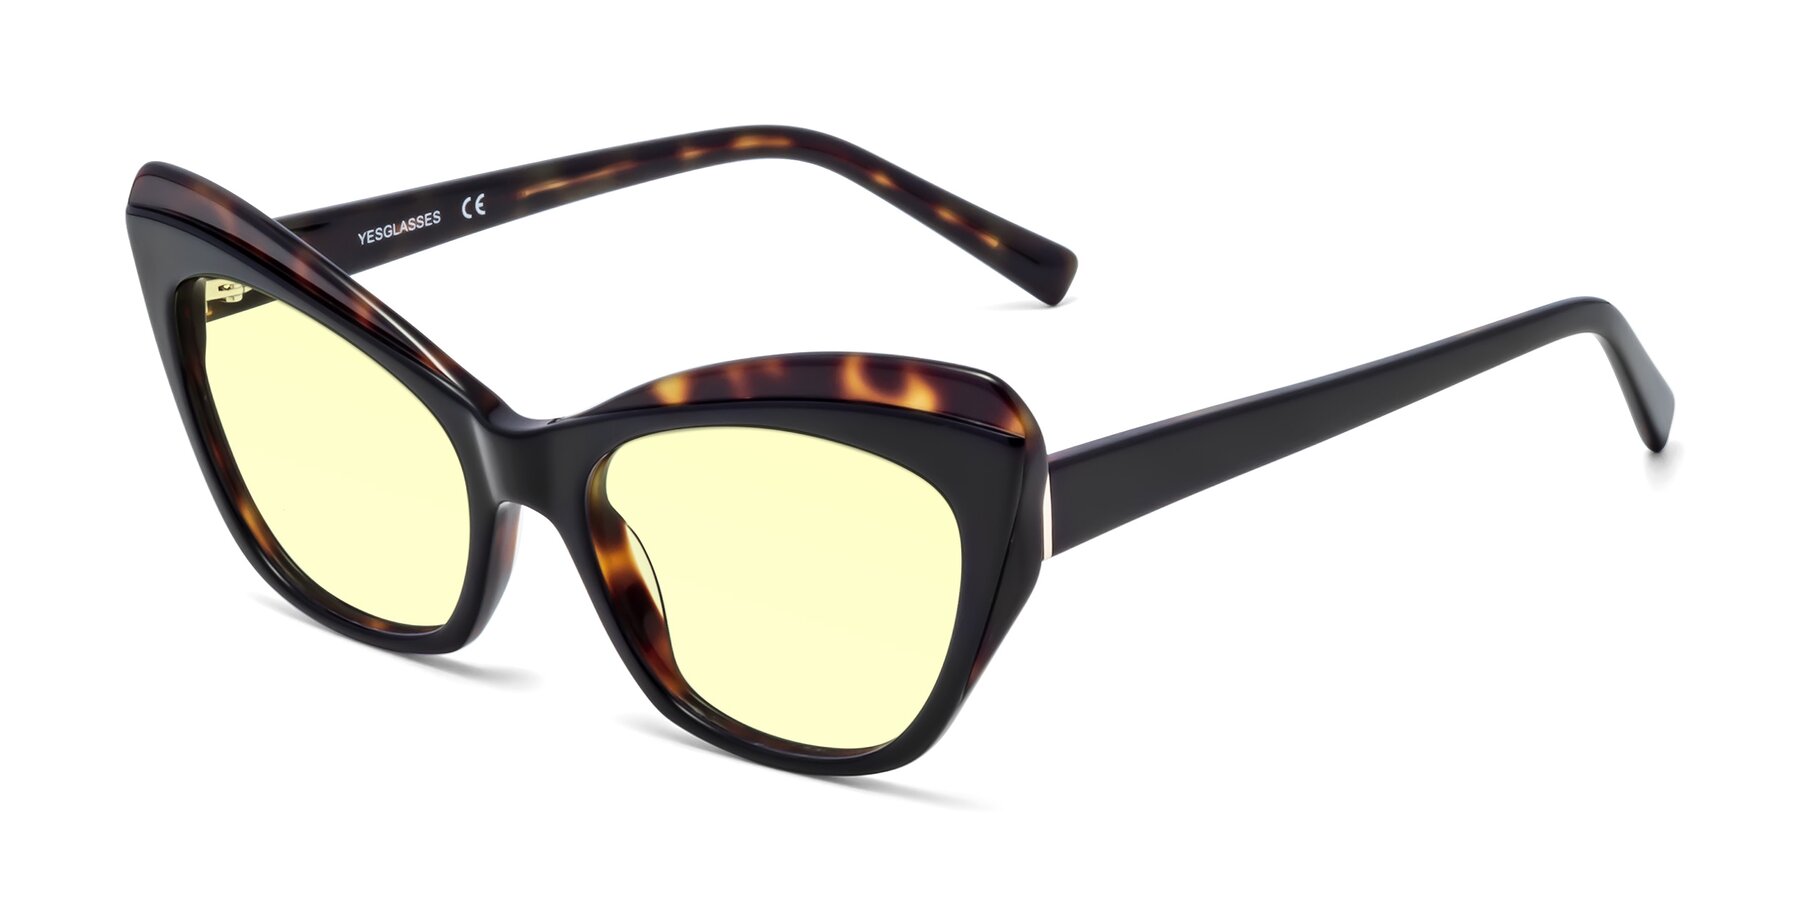 Angle of 1469 in Black-Tortoise with Light Yellow Tinted Lenses